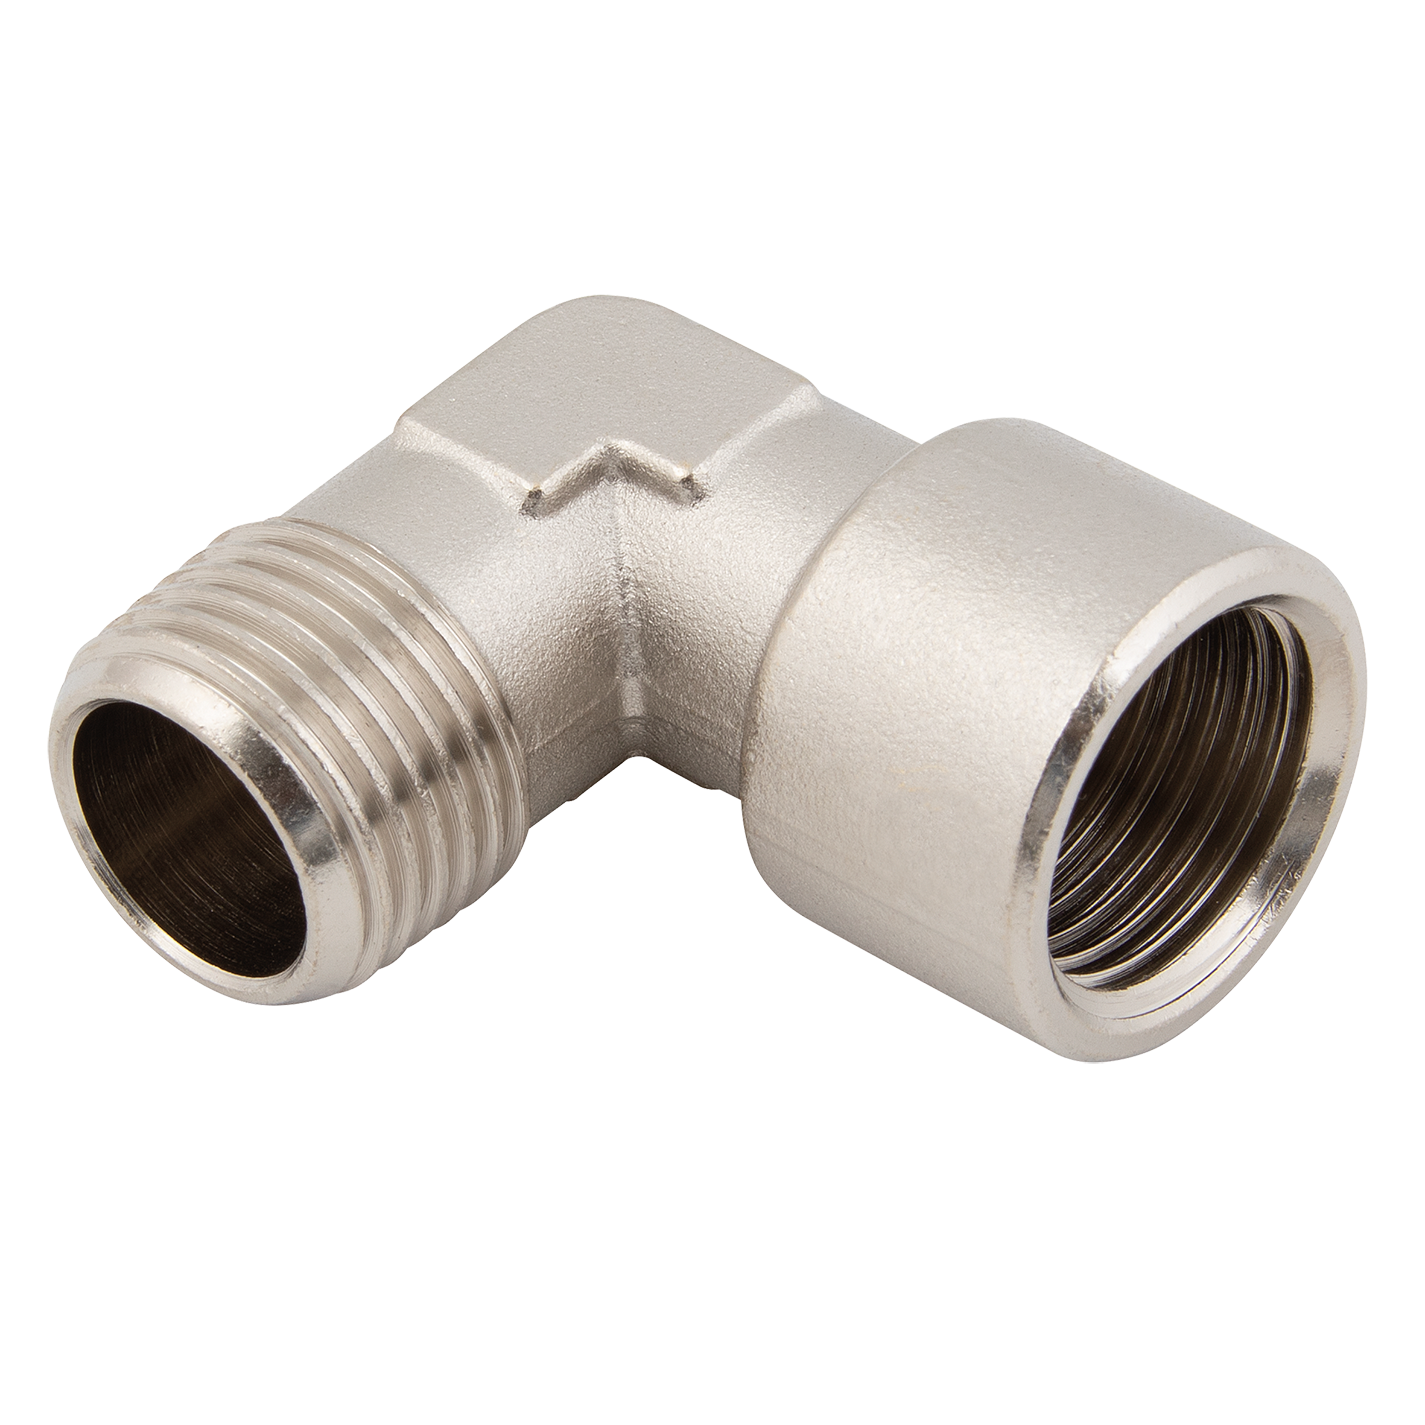 3/4" BSPT Male x 3/4" BSPP Female Equal Elbow